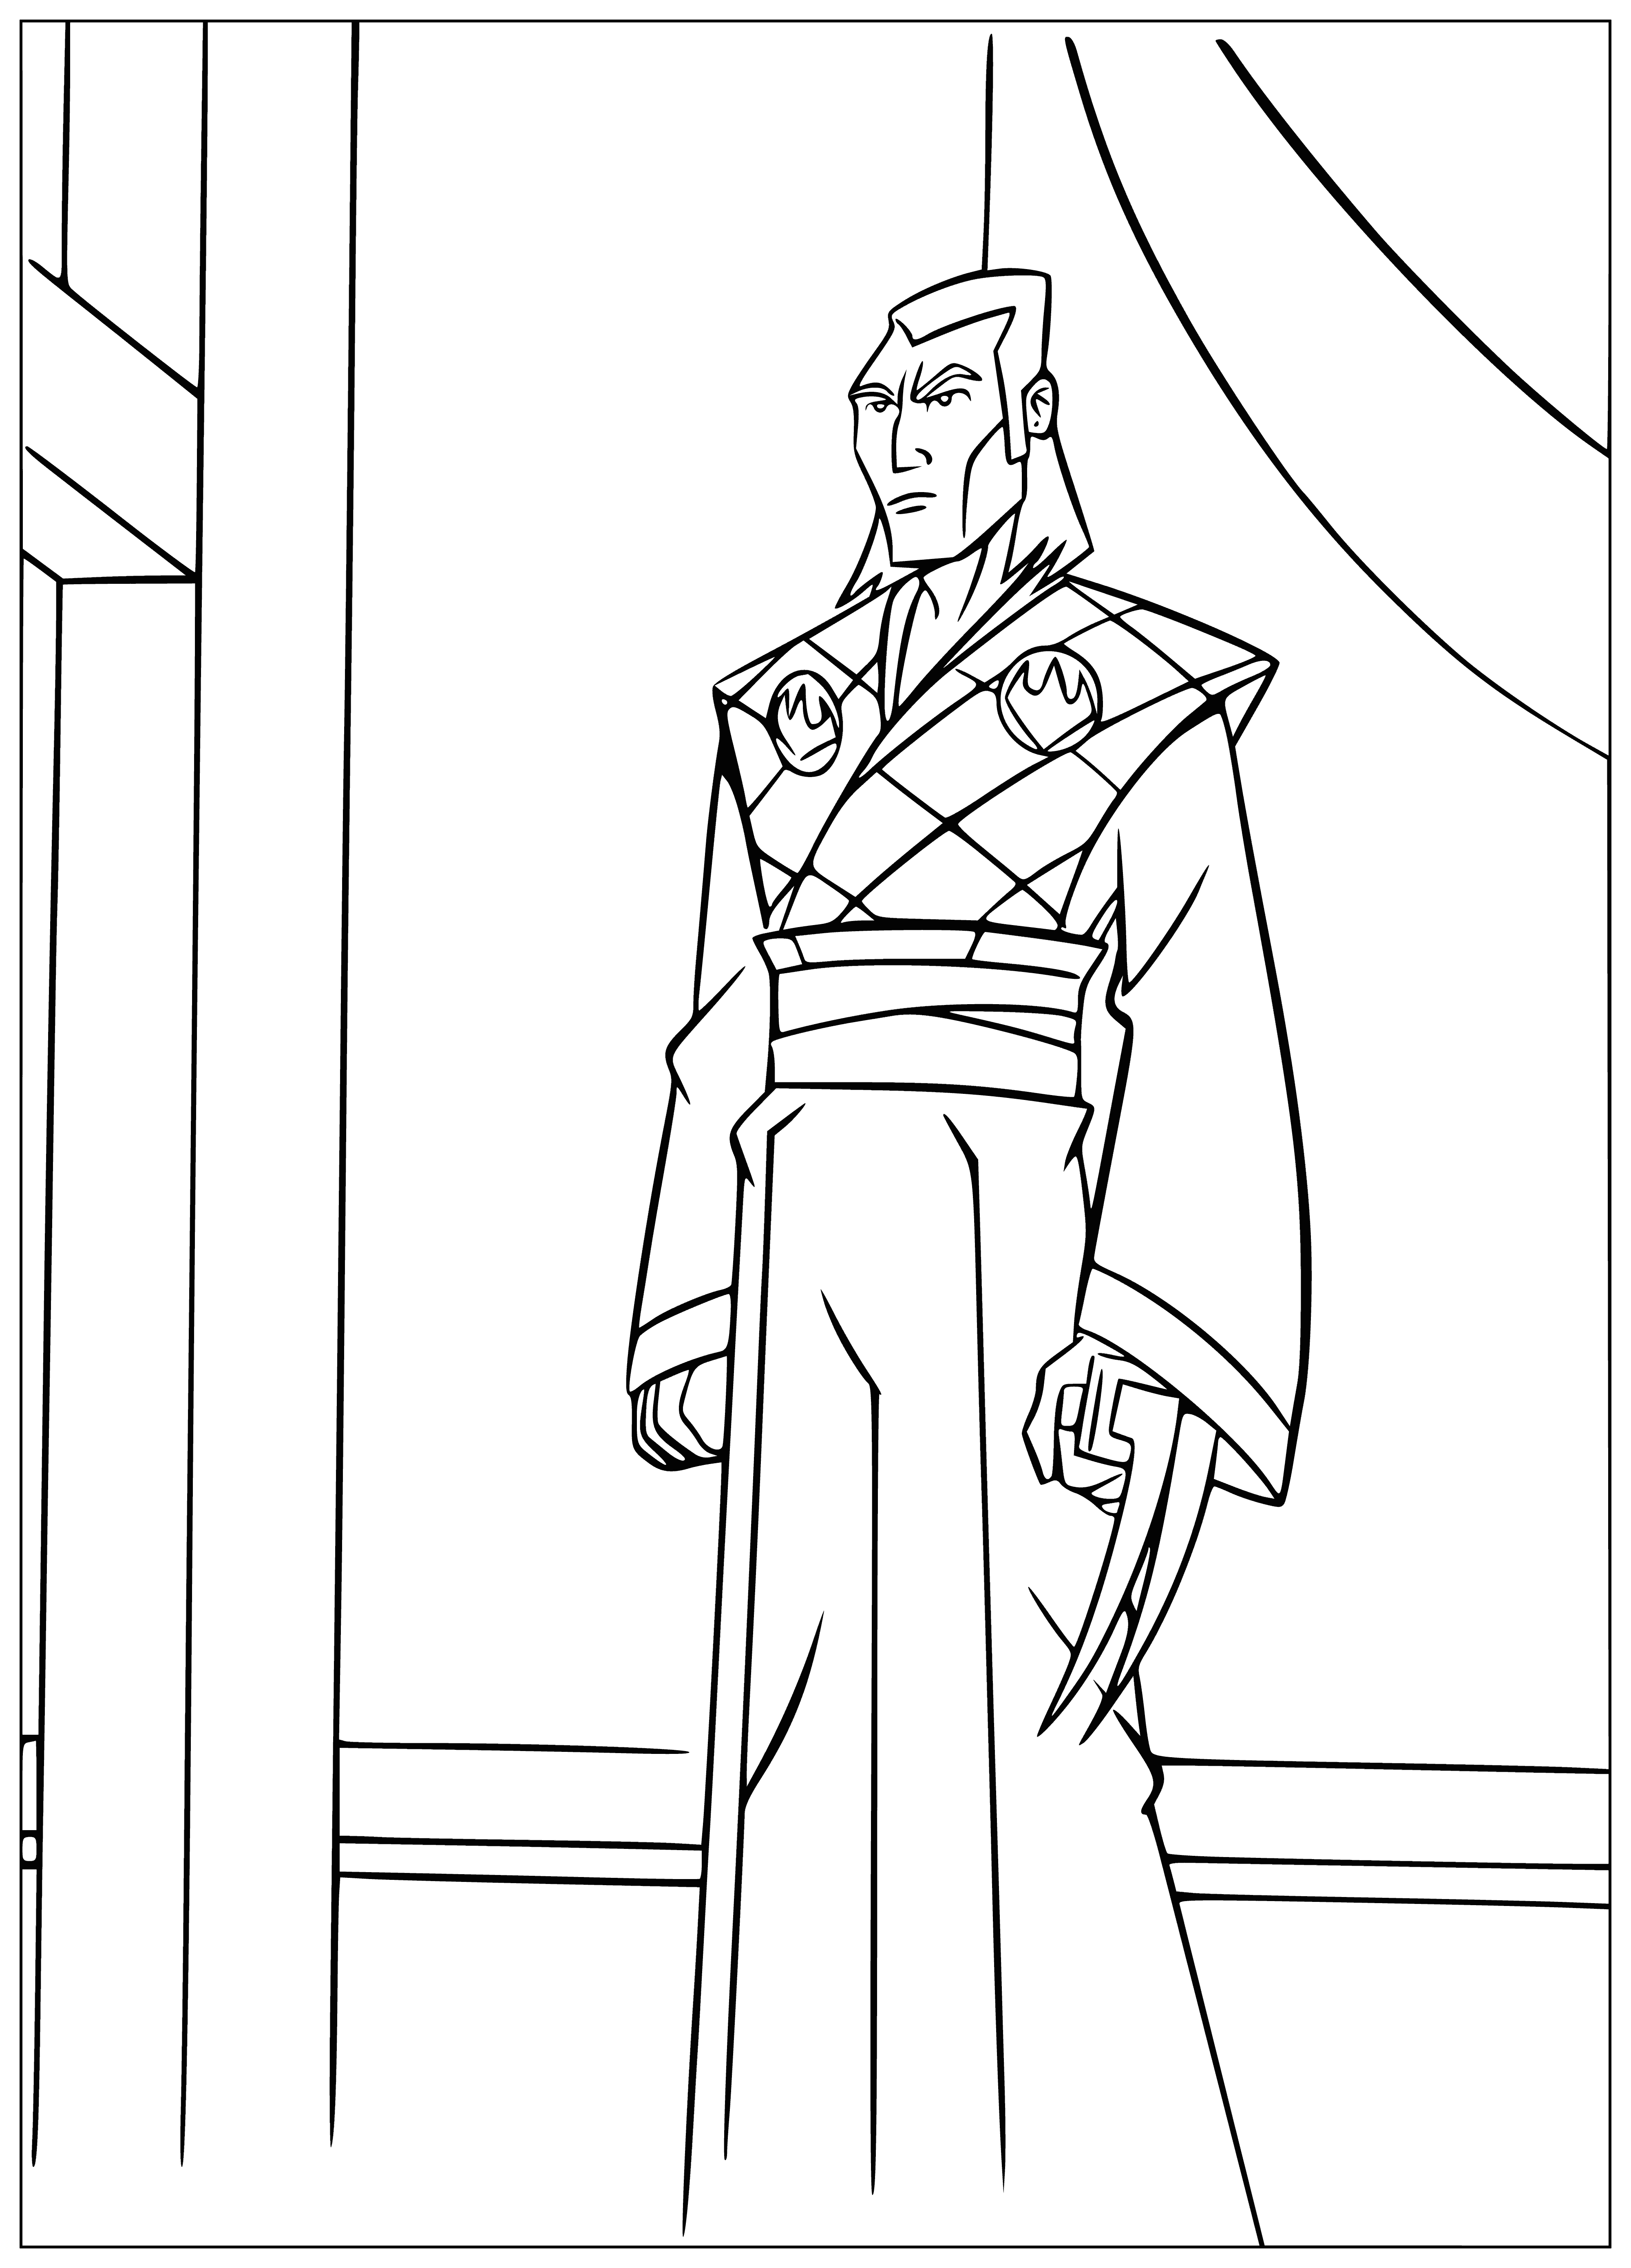 Enemy of turtles coloring page